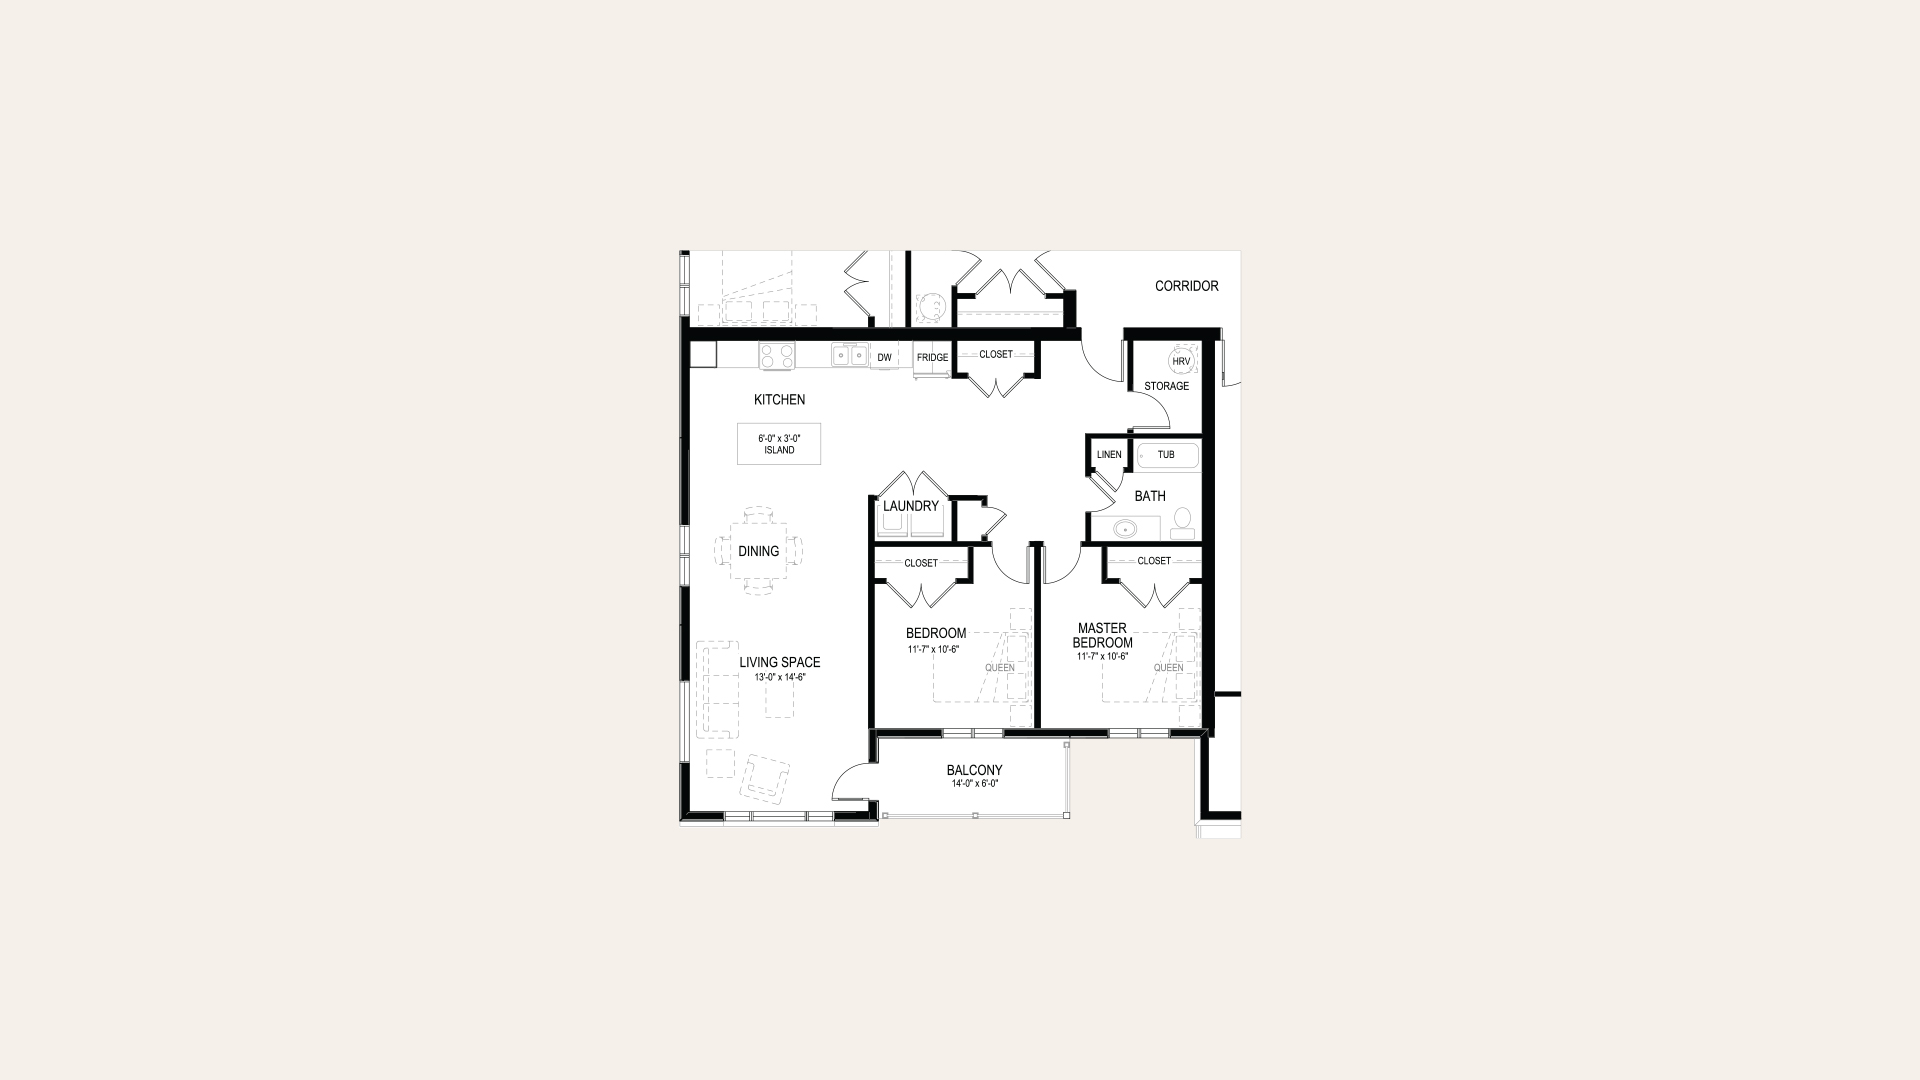 Floor plan of apartment B in Building B. Two bedrooms, one bathroom, laundry closet, balcony, and an open concept kitchen and living room.